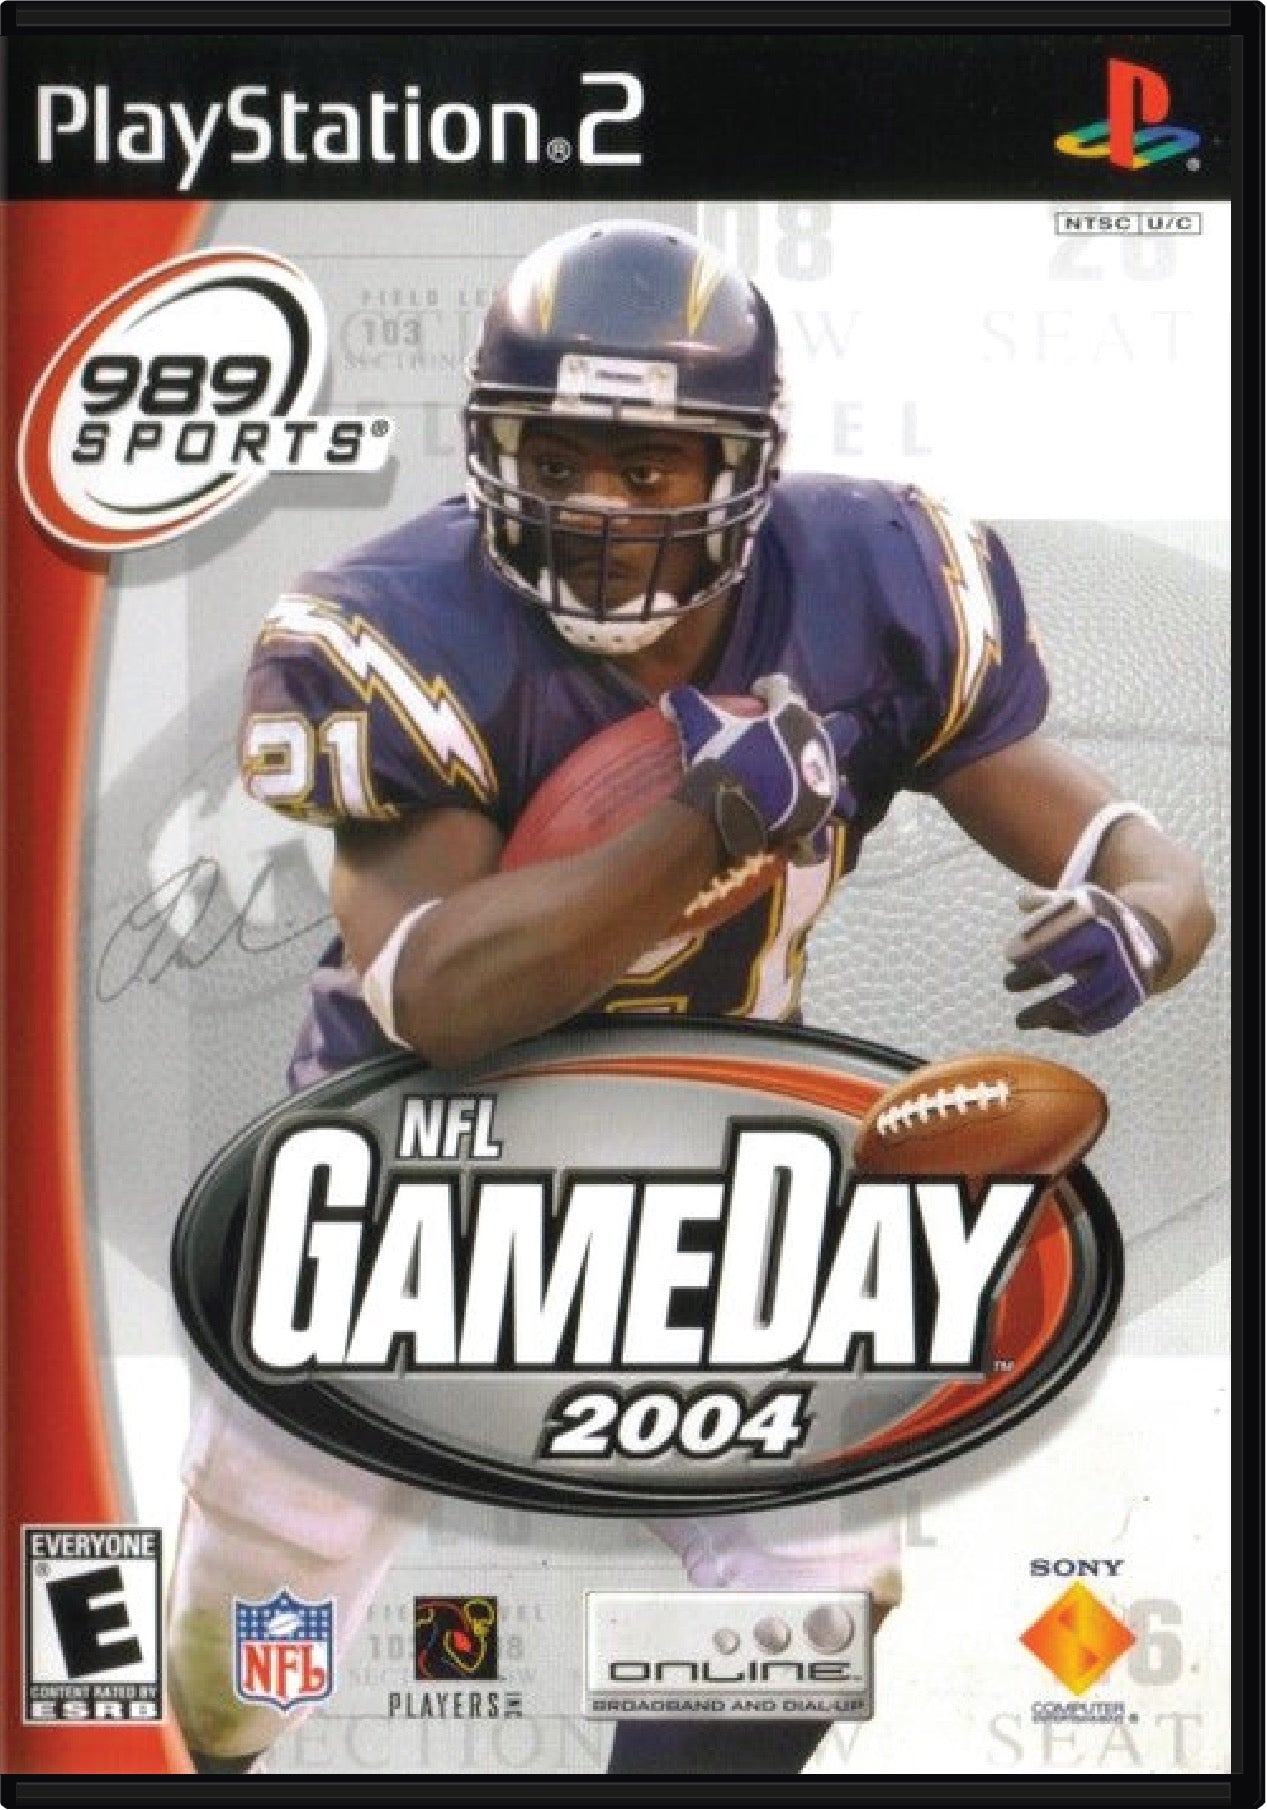 NFL Gameday 2004 Cover Art and Product Photo